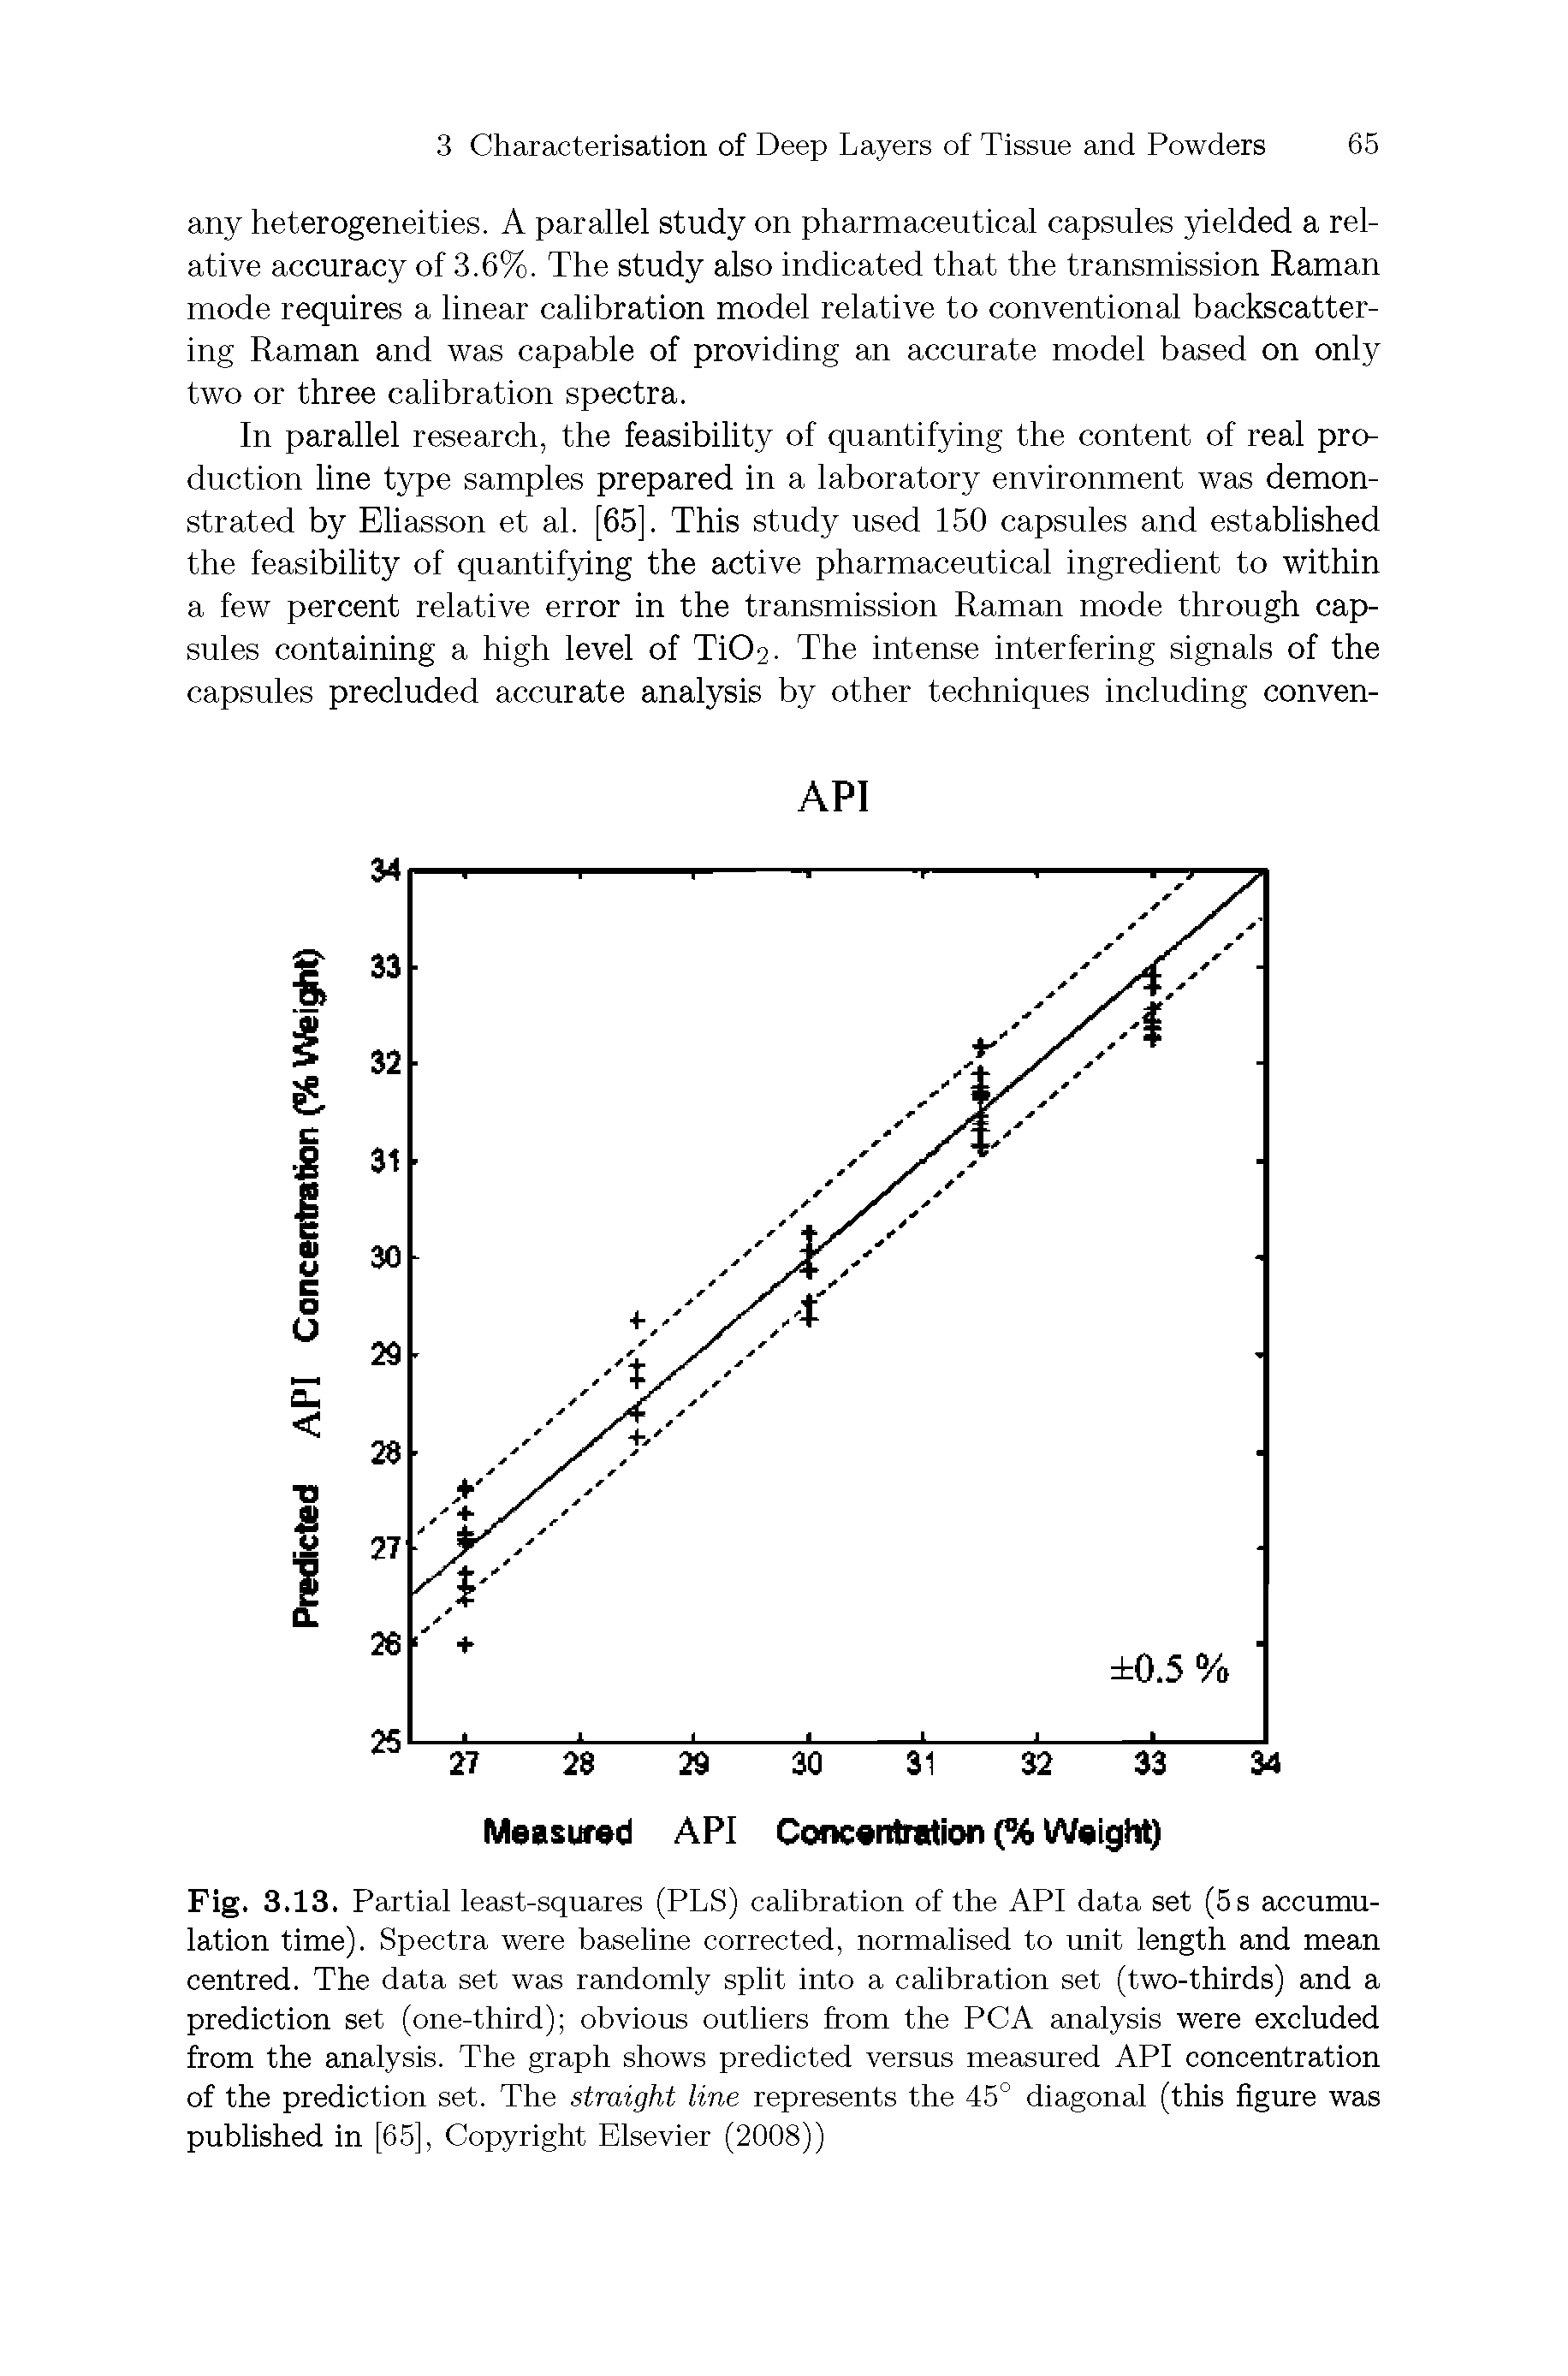 Fig. 3.13. Partial least-squares (PLS) calibration of the API data set (5 s accumulation time). Spectra were baseline corrected, normalised to unit length and mean centred. The data set was randomly split into a calibration set (two-thirds) and a prediction set (one-third) obvious outliers from the PCA analysis were excluded from the analysis. The graph shows predicted versus measured API concentration of the prediction set. The straight line represents the 45° diagonal (this figure was published in [65], Copyright Elsevier (2008))...